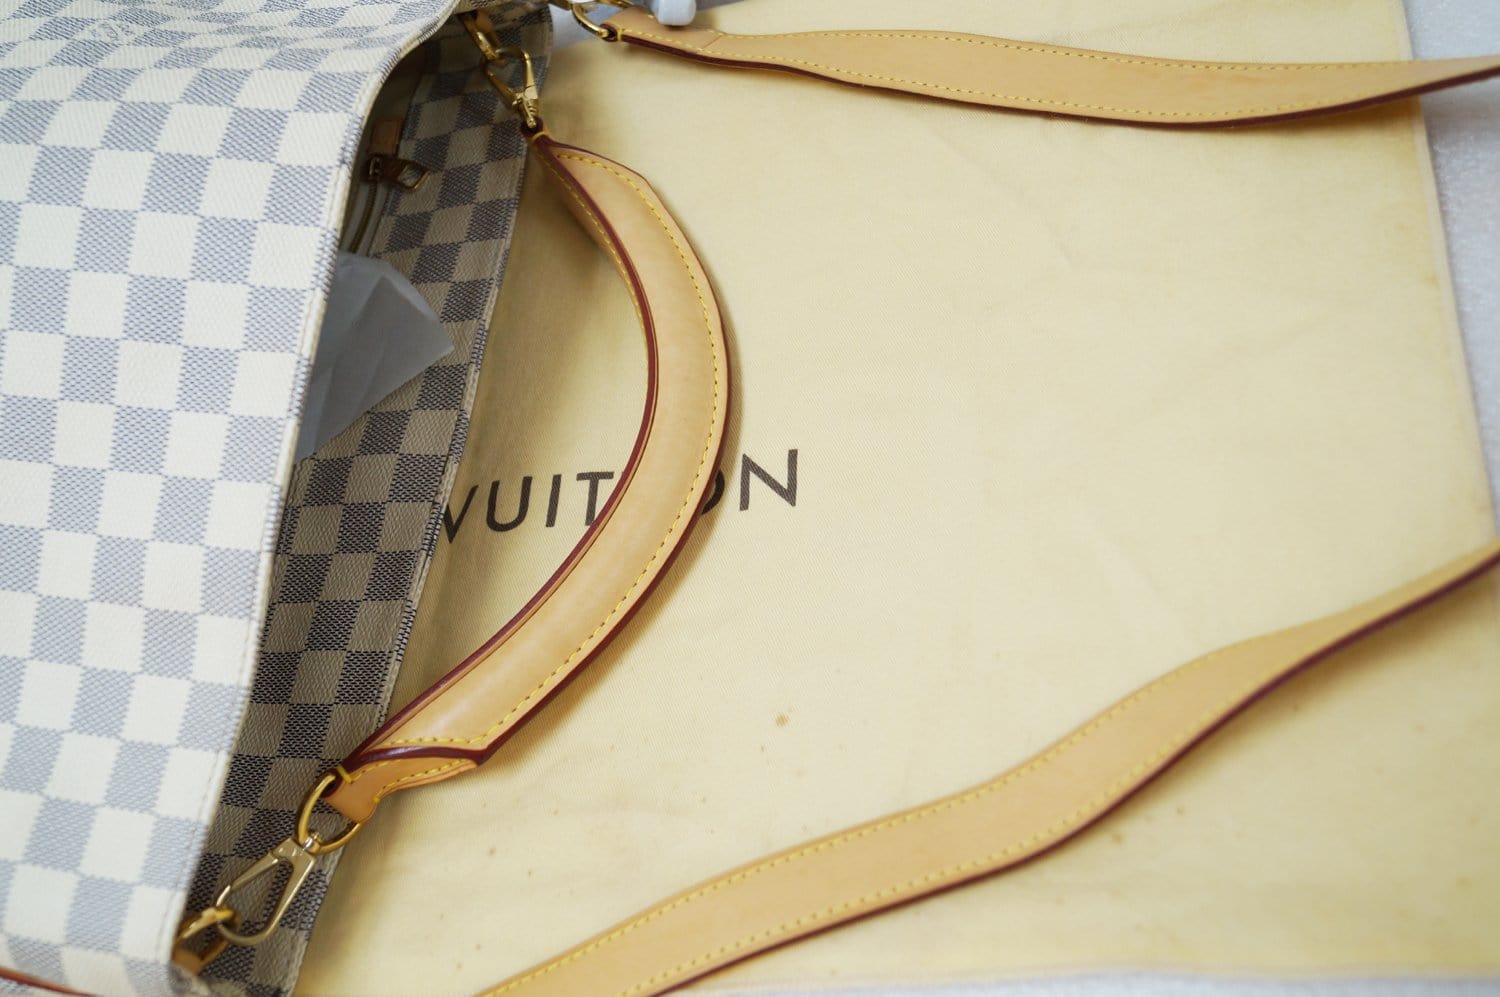 New Louis Vuitton Damier Azur Soffi, Just saw it on the store